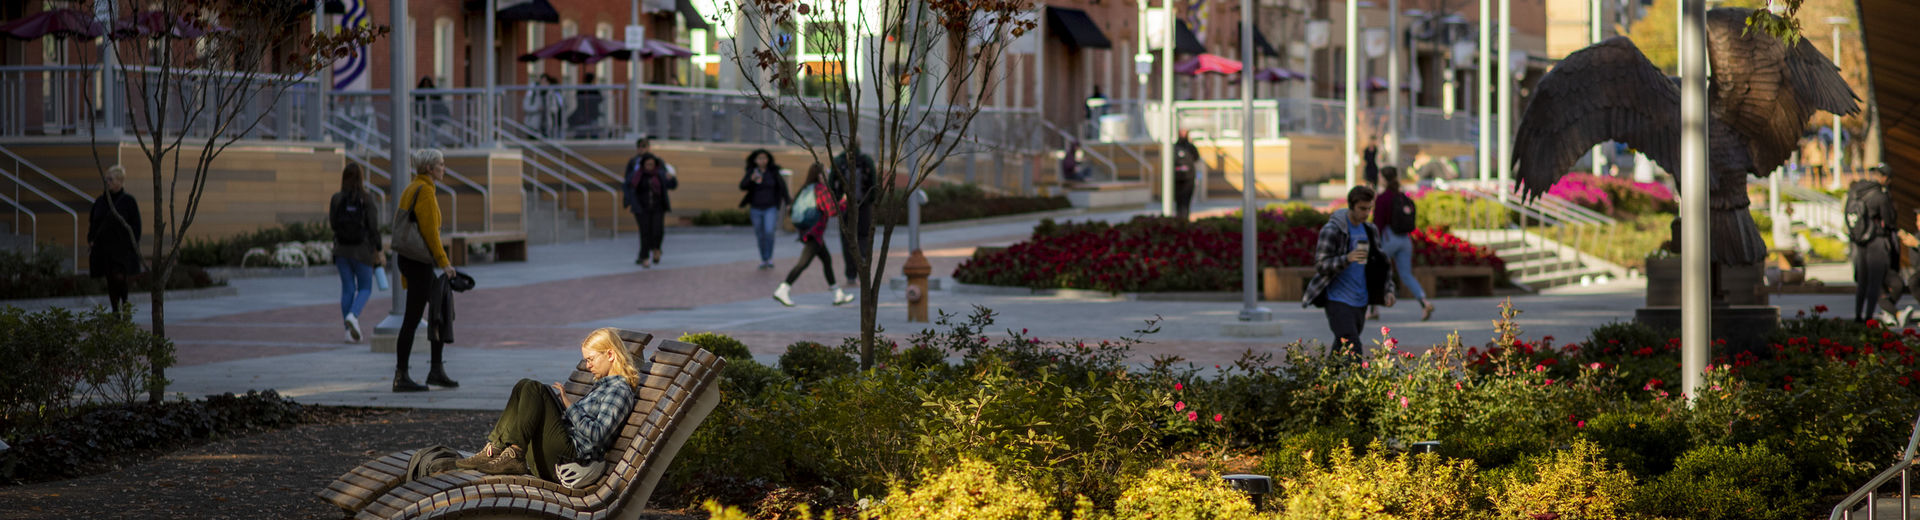 Students walking through O'Connor Plaza on a sunny fall day